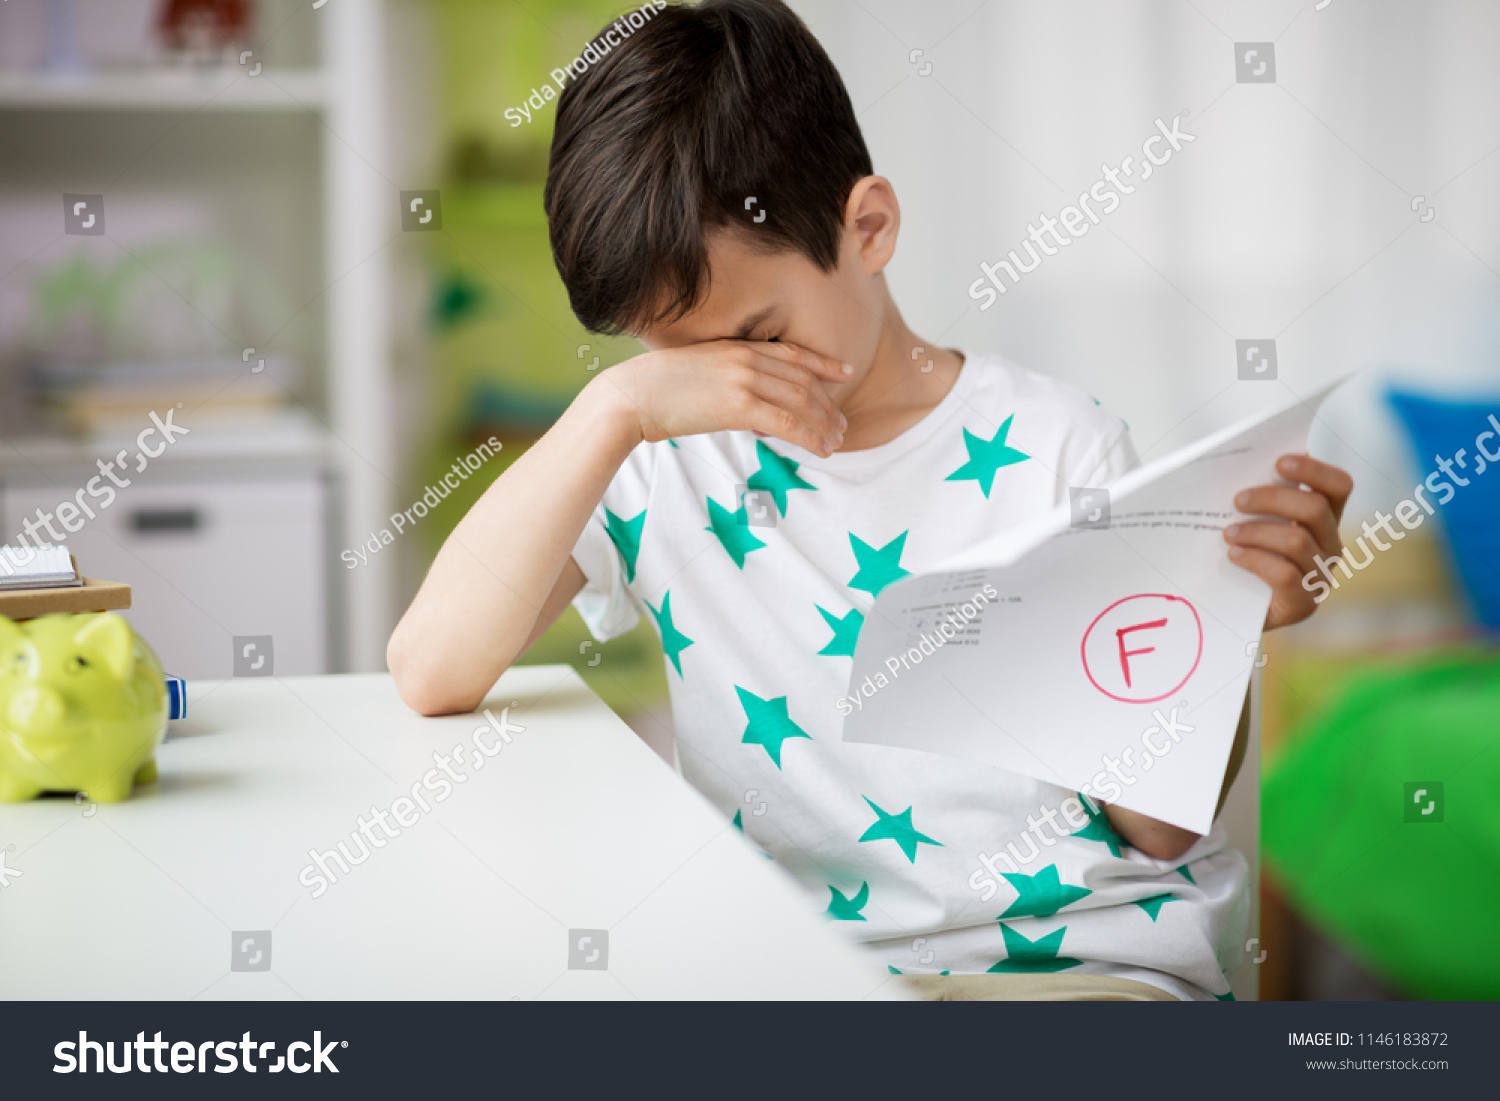 childhood, education and people concept - sad boy holding school test with f grade #1146183872